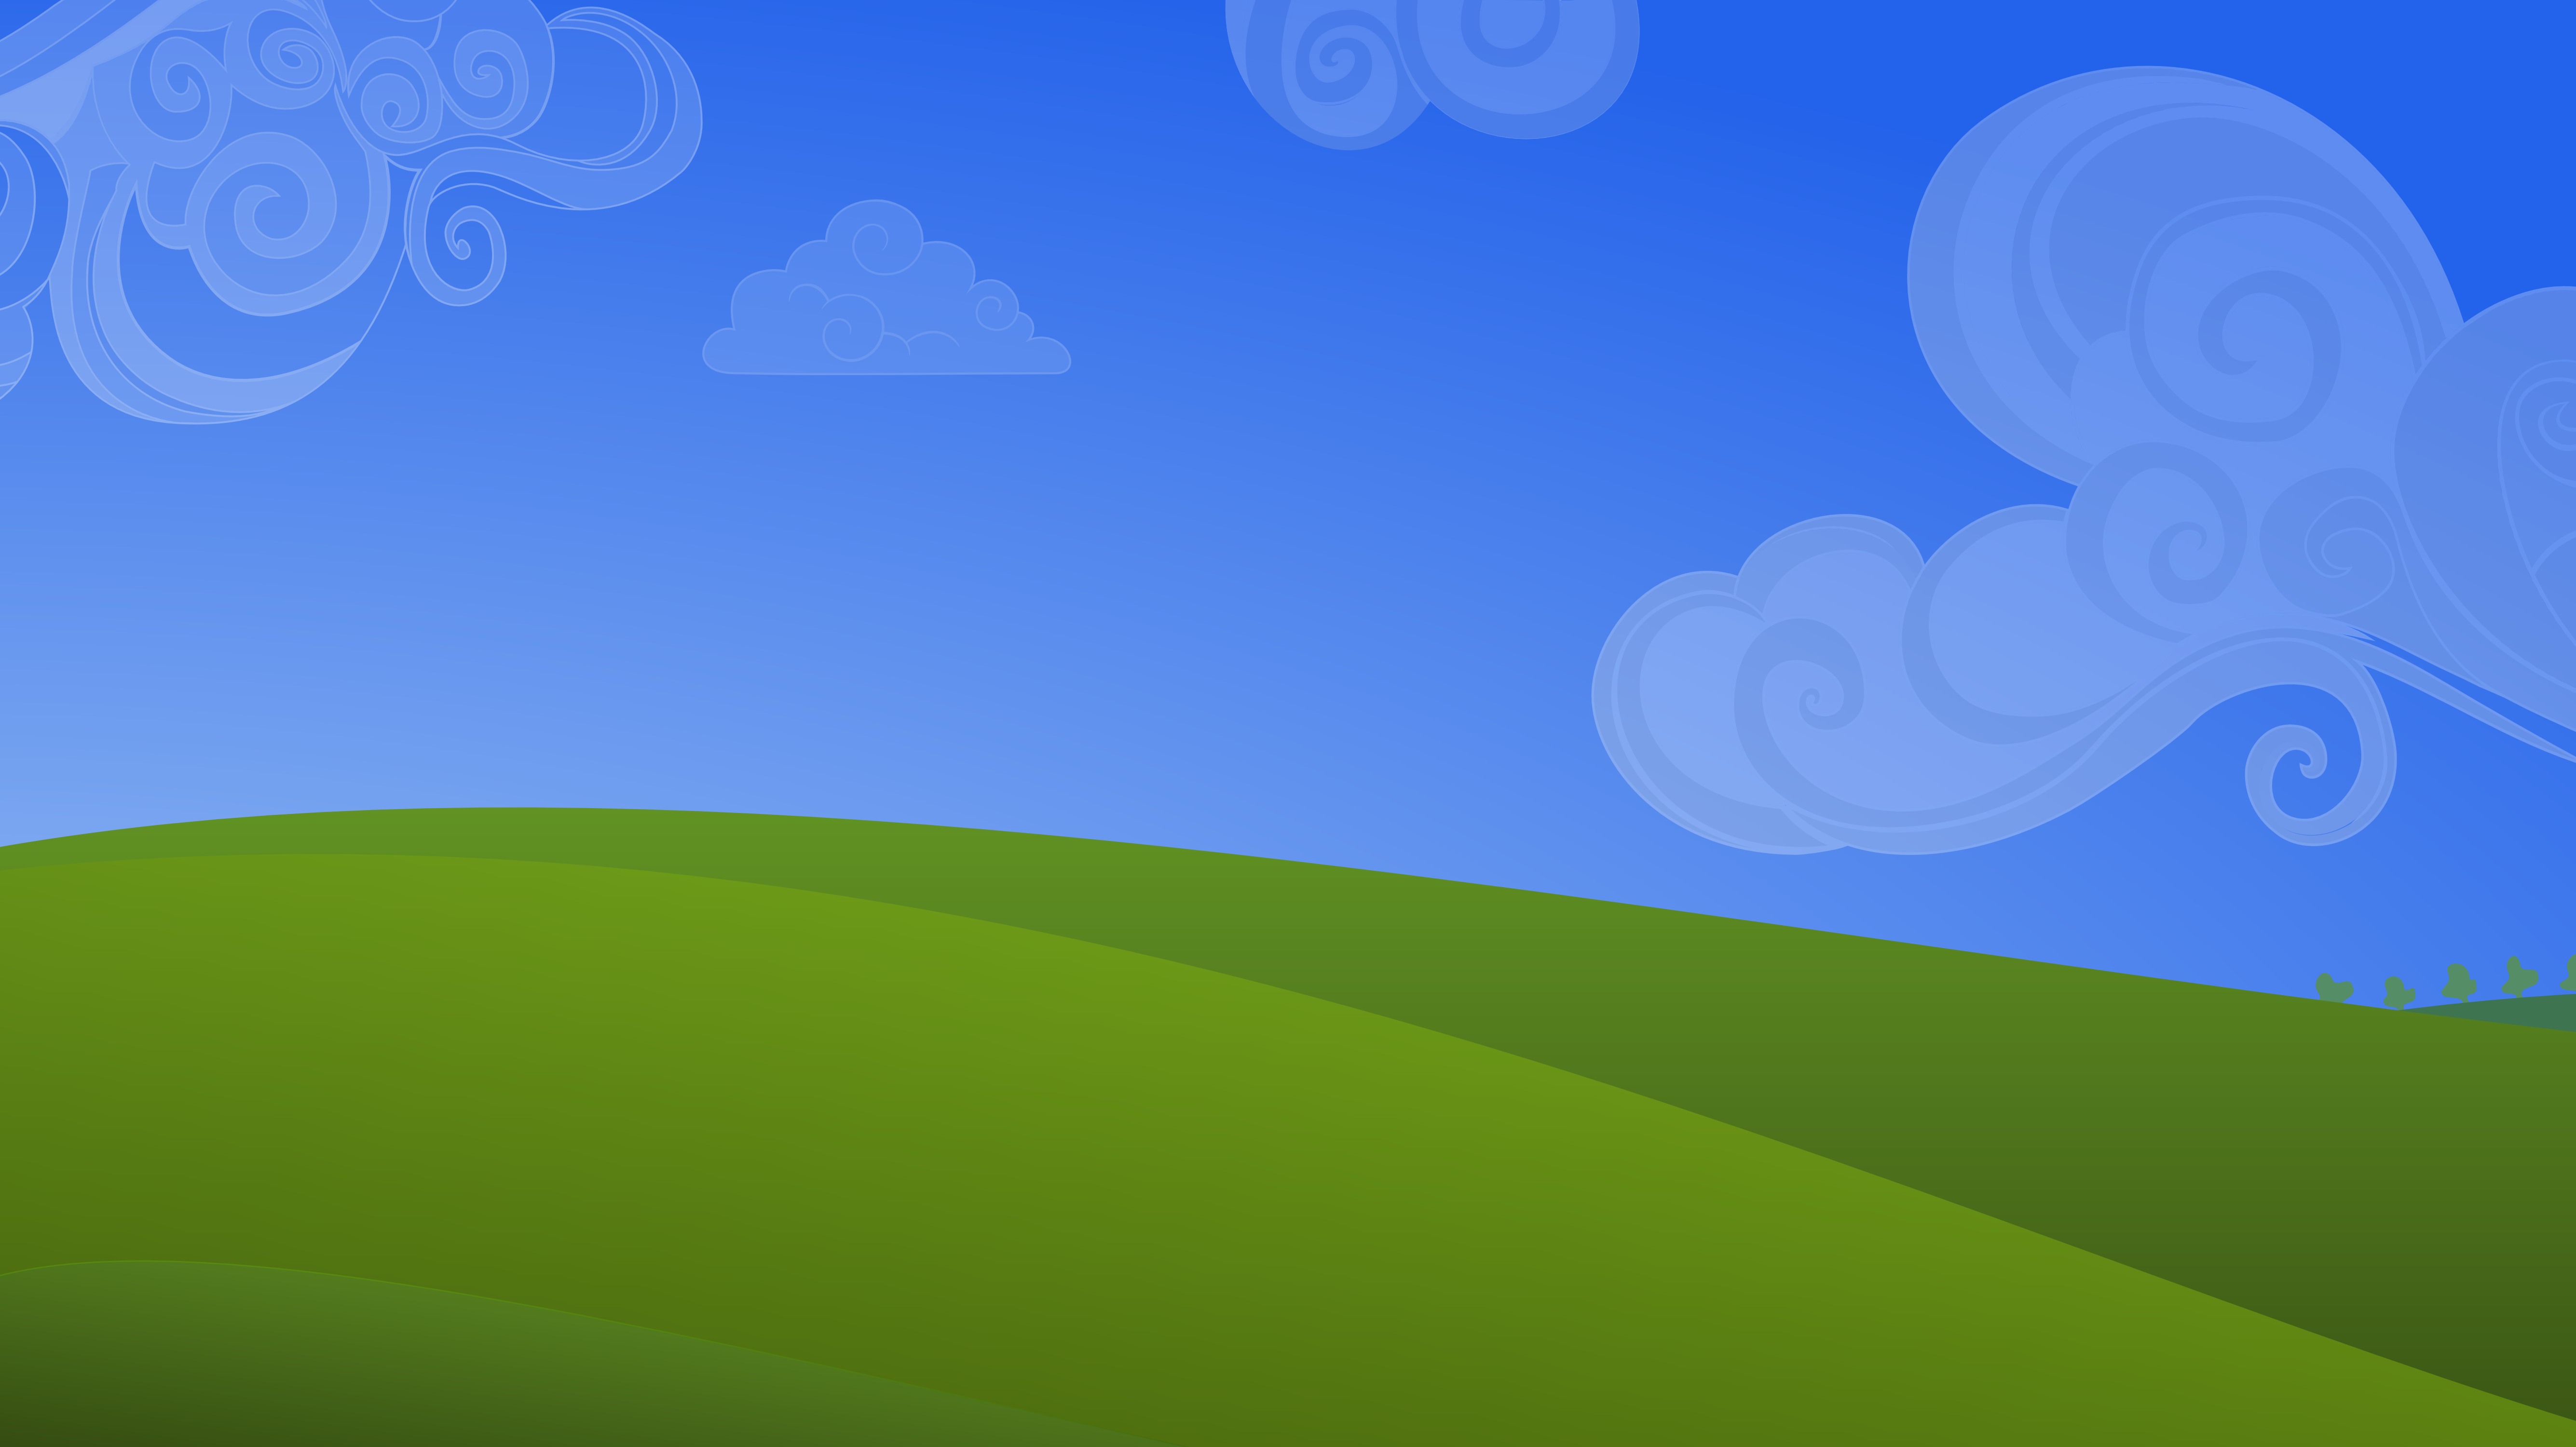 Windows XP HD Background Wallpapers 2972 - HD Wallpapers Site